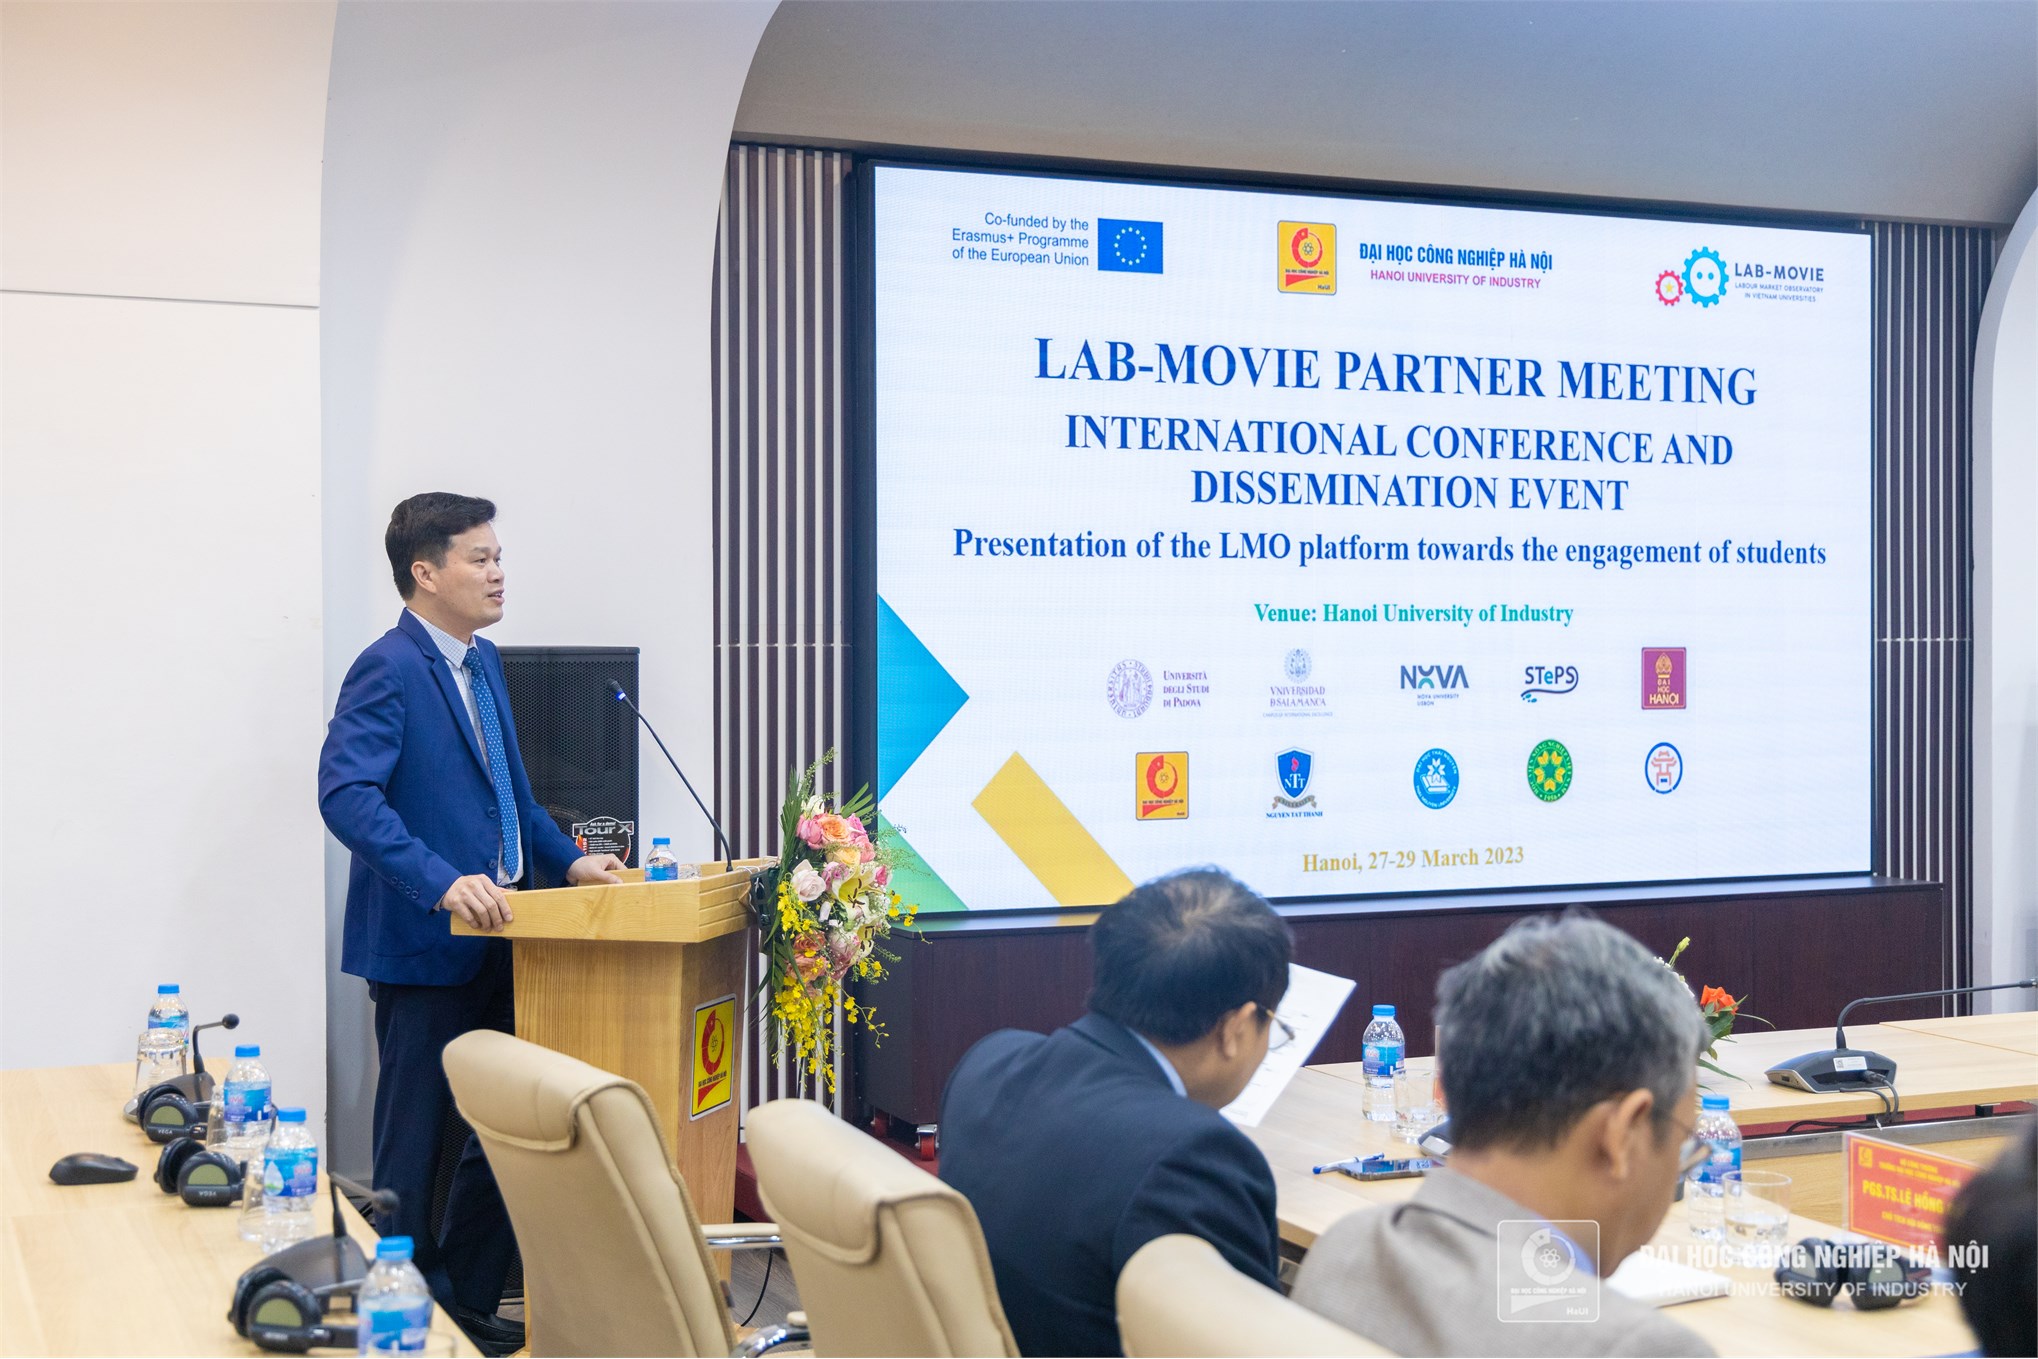 Lab–Movie: bridging the gap between academia and the Vietnamese labor market